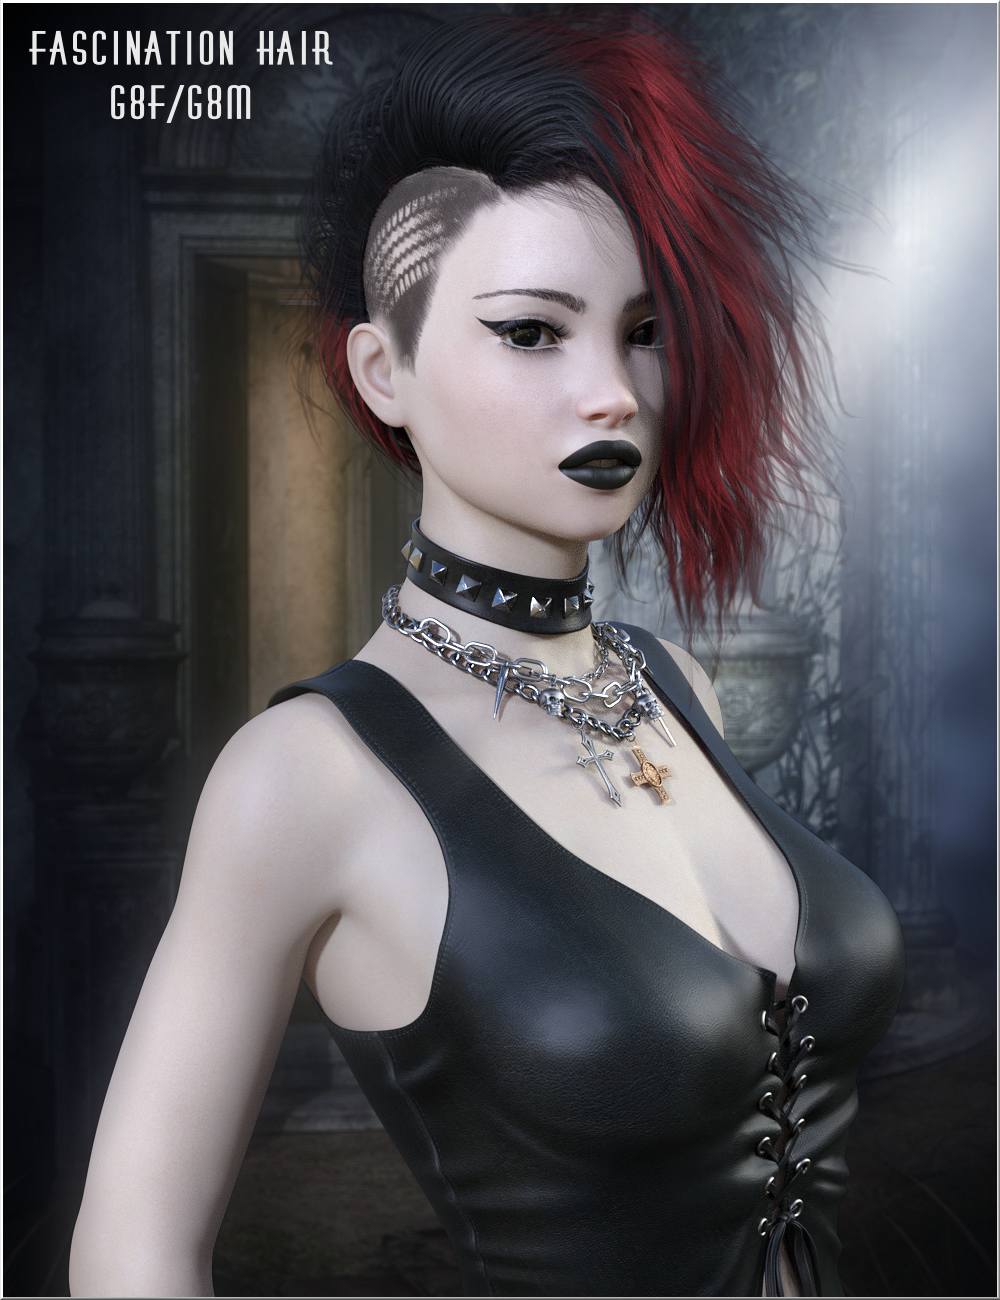 Fascination Hair G8F/G8M by: Propschick, 3D Models by Daz 3D